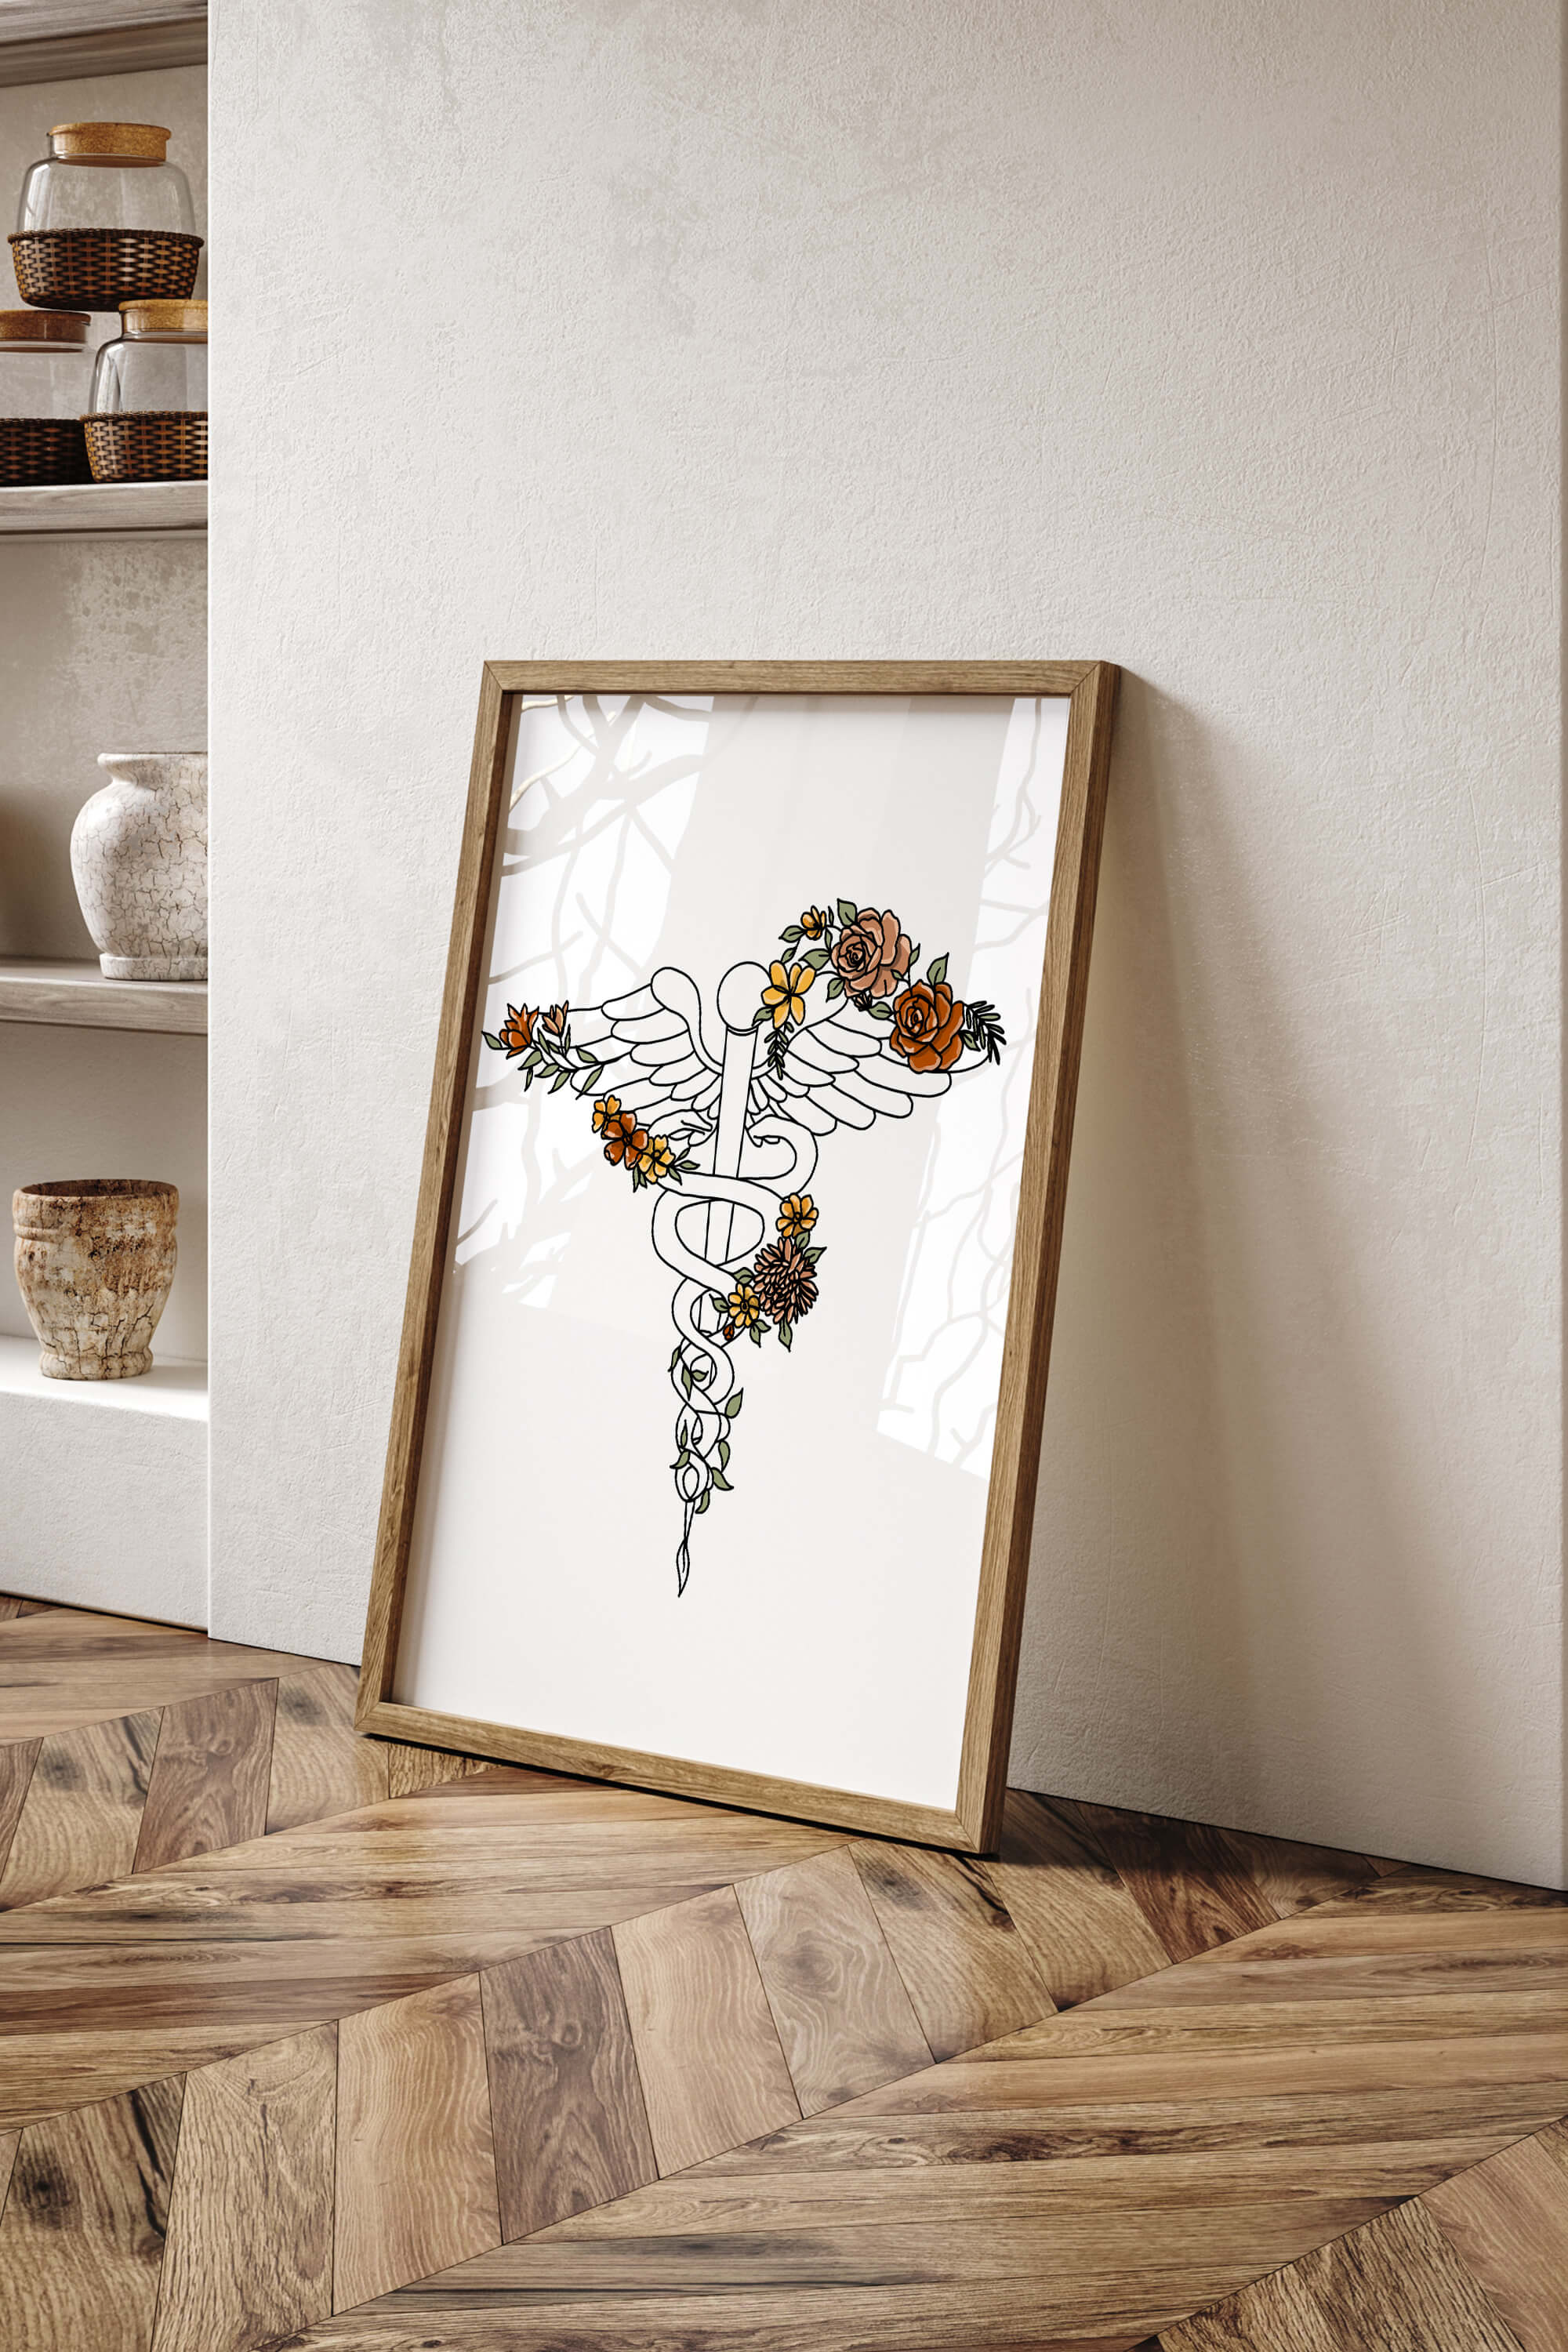 Modern Caduceus Artwork for Healthcare Professional Gifts, celebrating medical achievements with artistic flair.